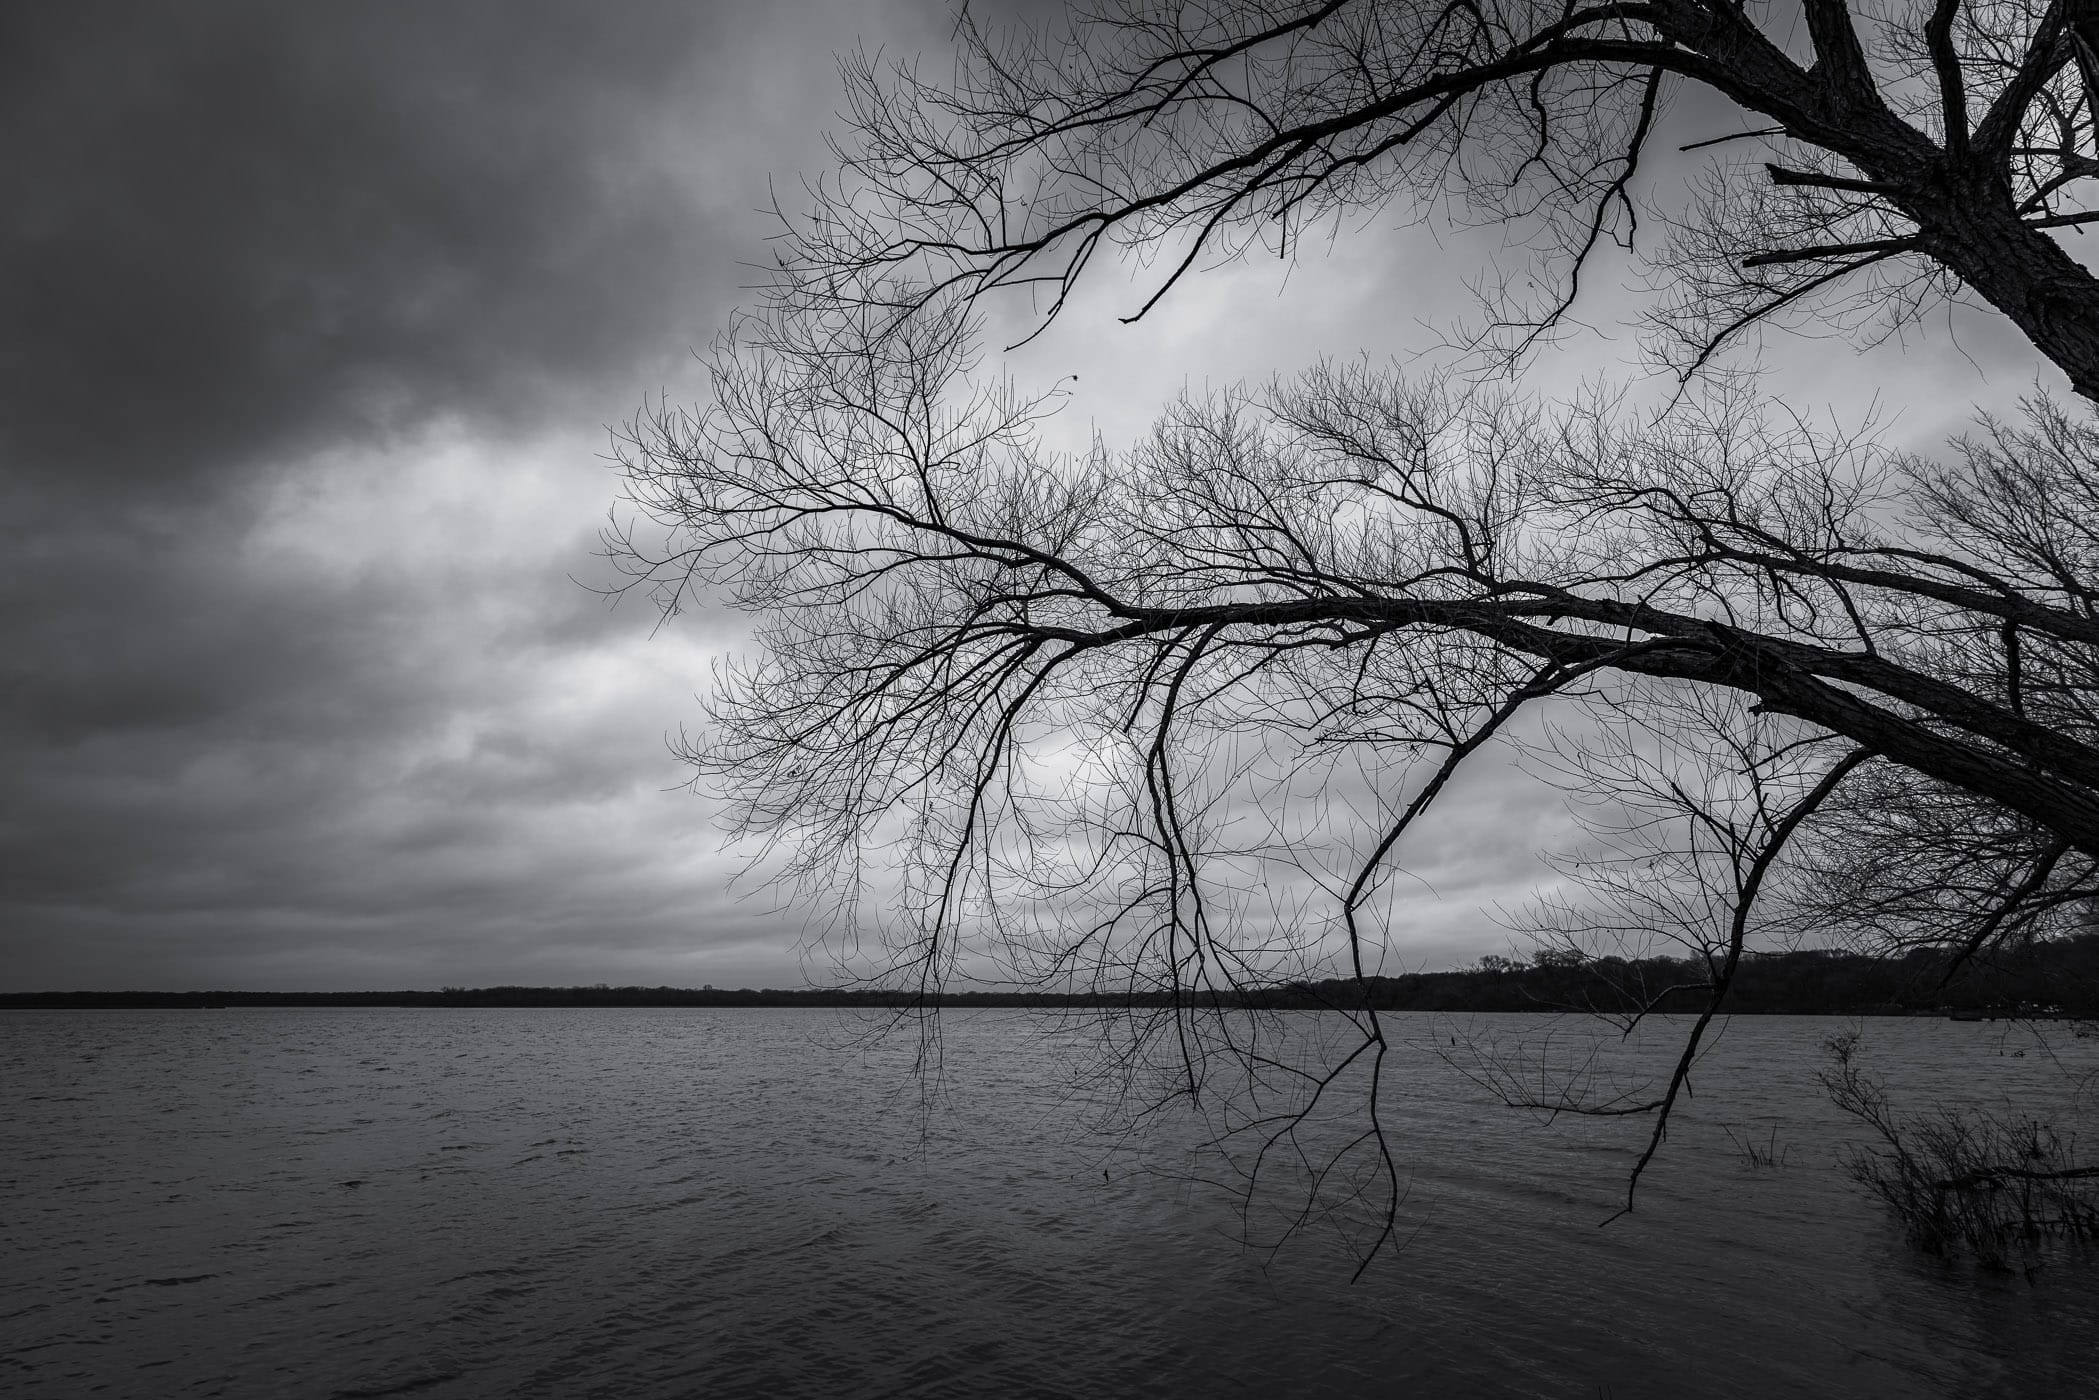 Tree branches reach over the lake at Texas' Fort Parker State Park on a cloudy, dreary day.